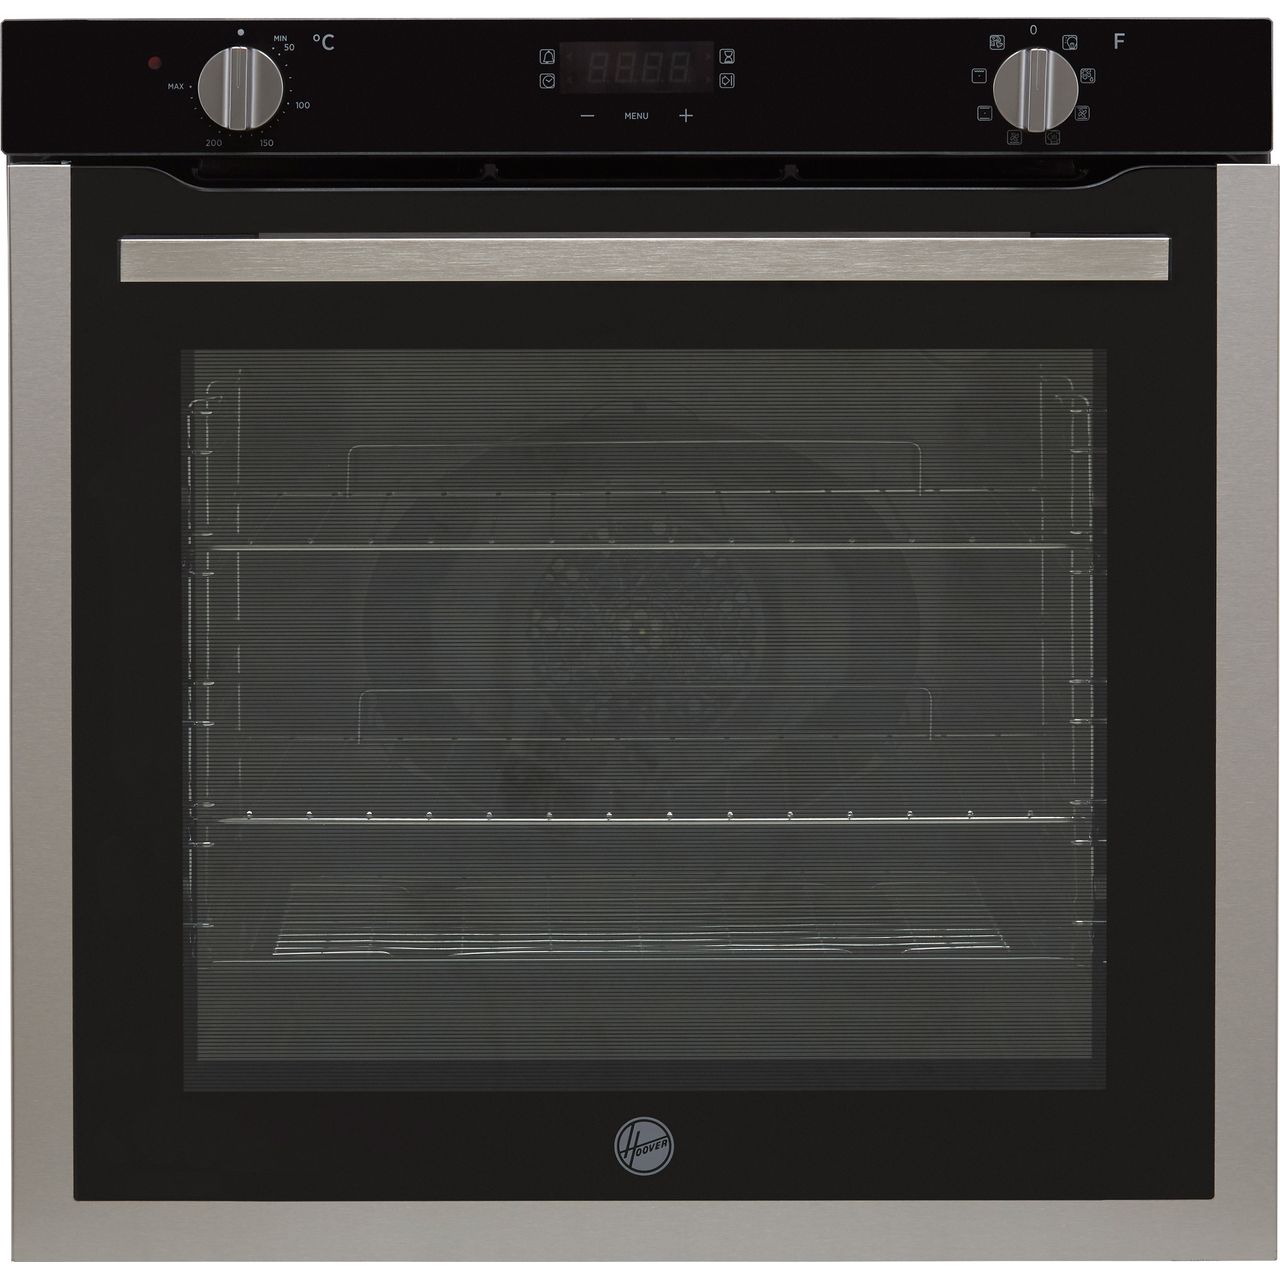 Hoover H-OVEN 300 Electric Single Oven - Black / Stainless Steel - A Rated